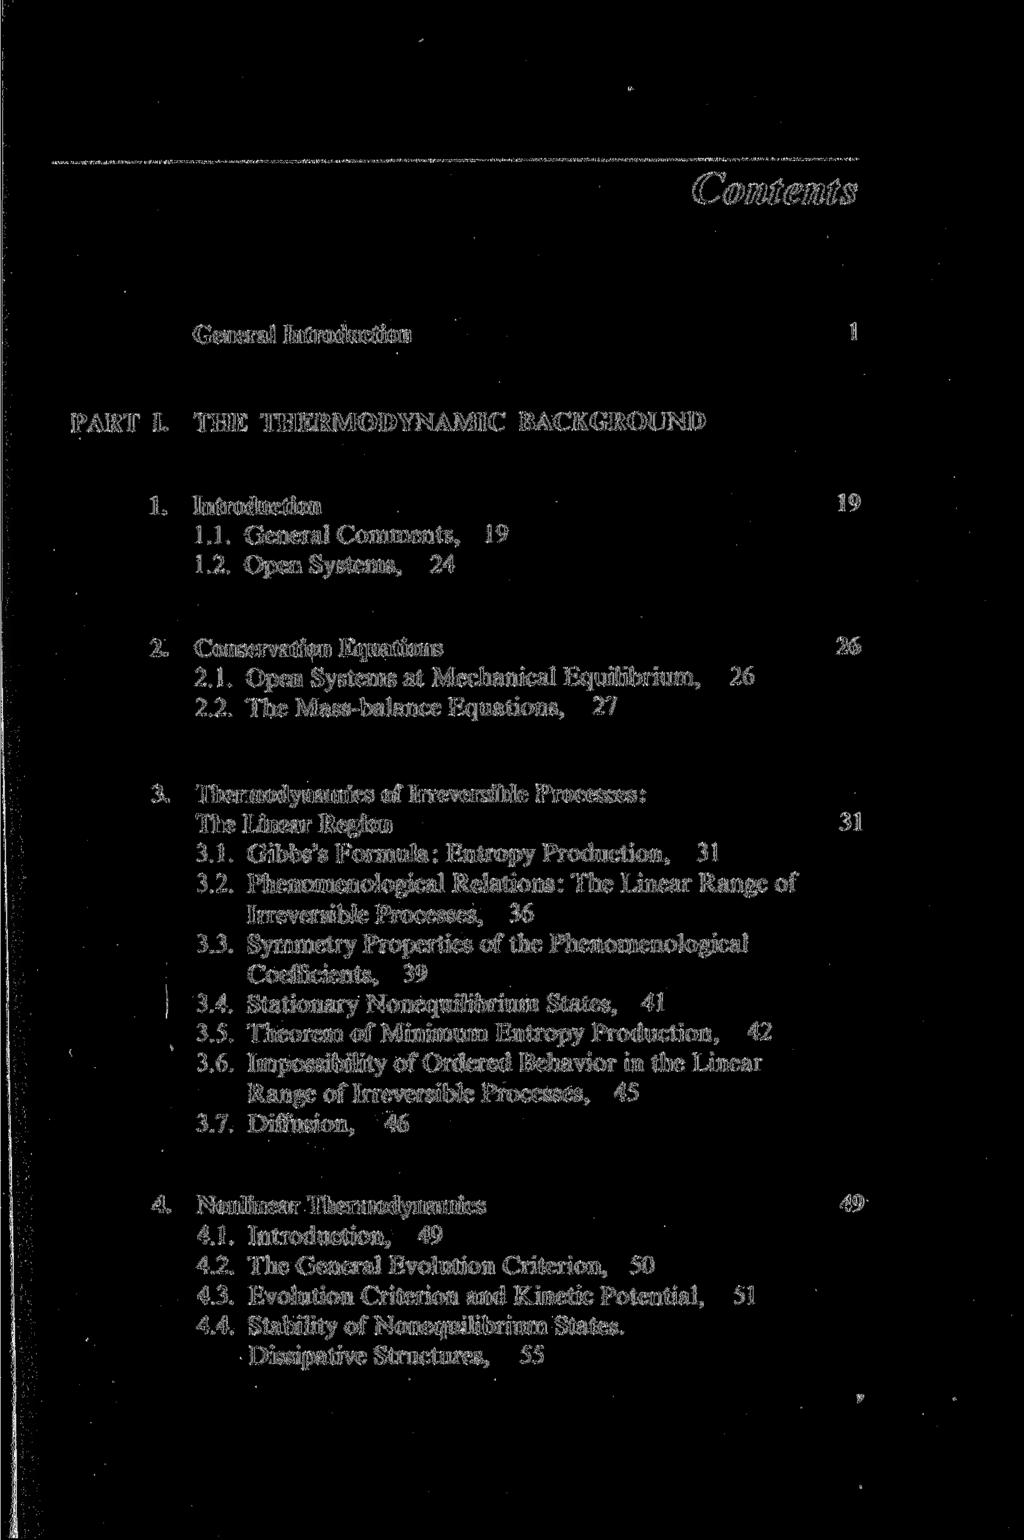 General Introduction 1 PART I. THE THERMODYNAMIC BACKGROUND 1. Introduction 19 1.1. General Comments, 19 1.2. Open Systems, 24 2. Conservation Equations 26 2.1. Open Systems at Mechanical Equilibrium, 26 2.